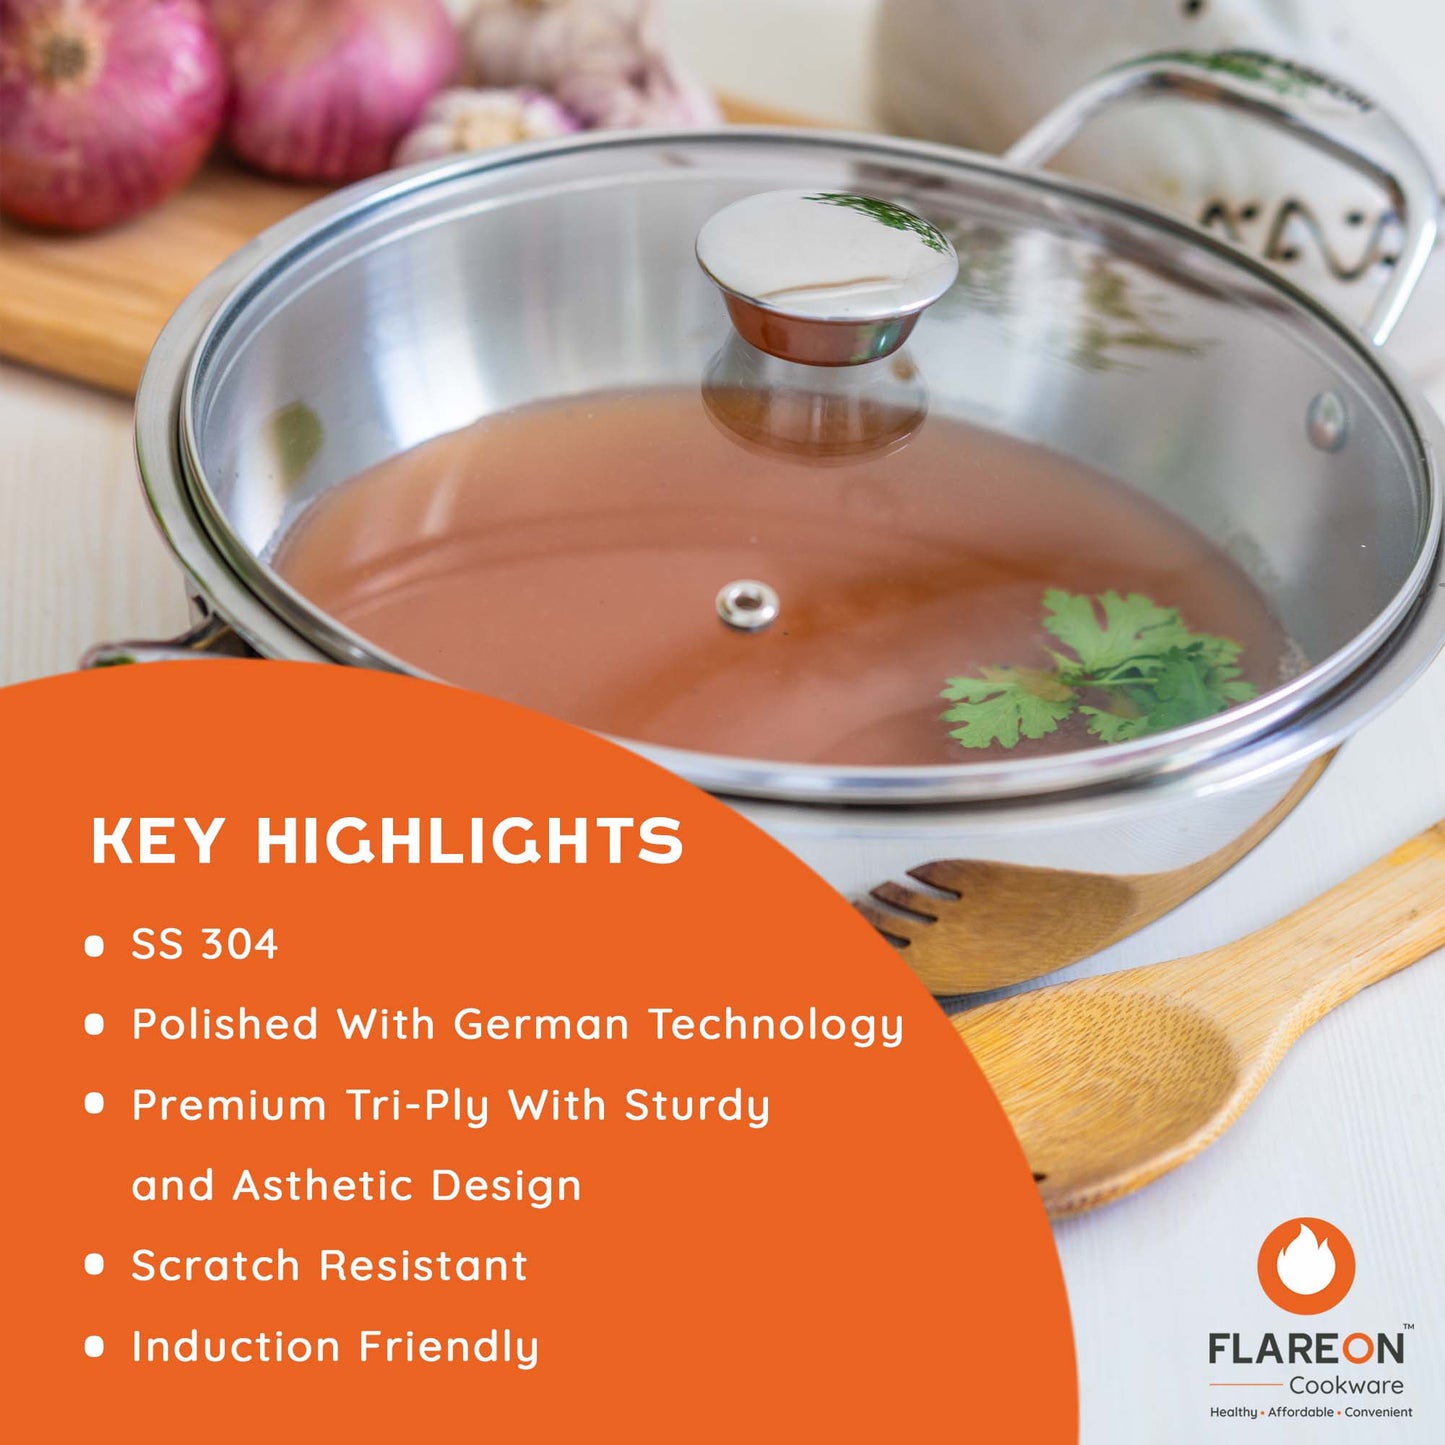 FlareOn's TriPly Stainless Steel Kadai With Glass Lid 24 Cm- Key Highlights